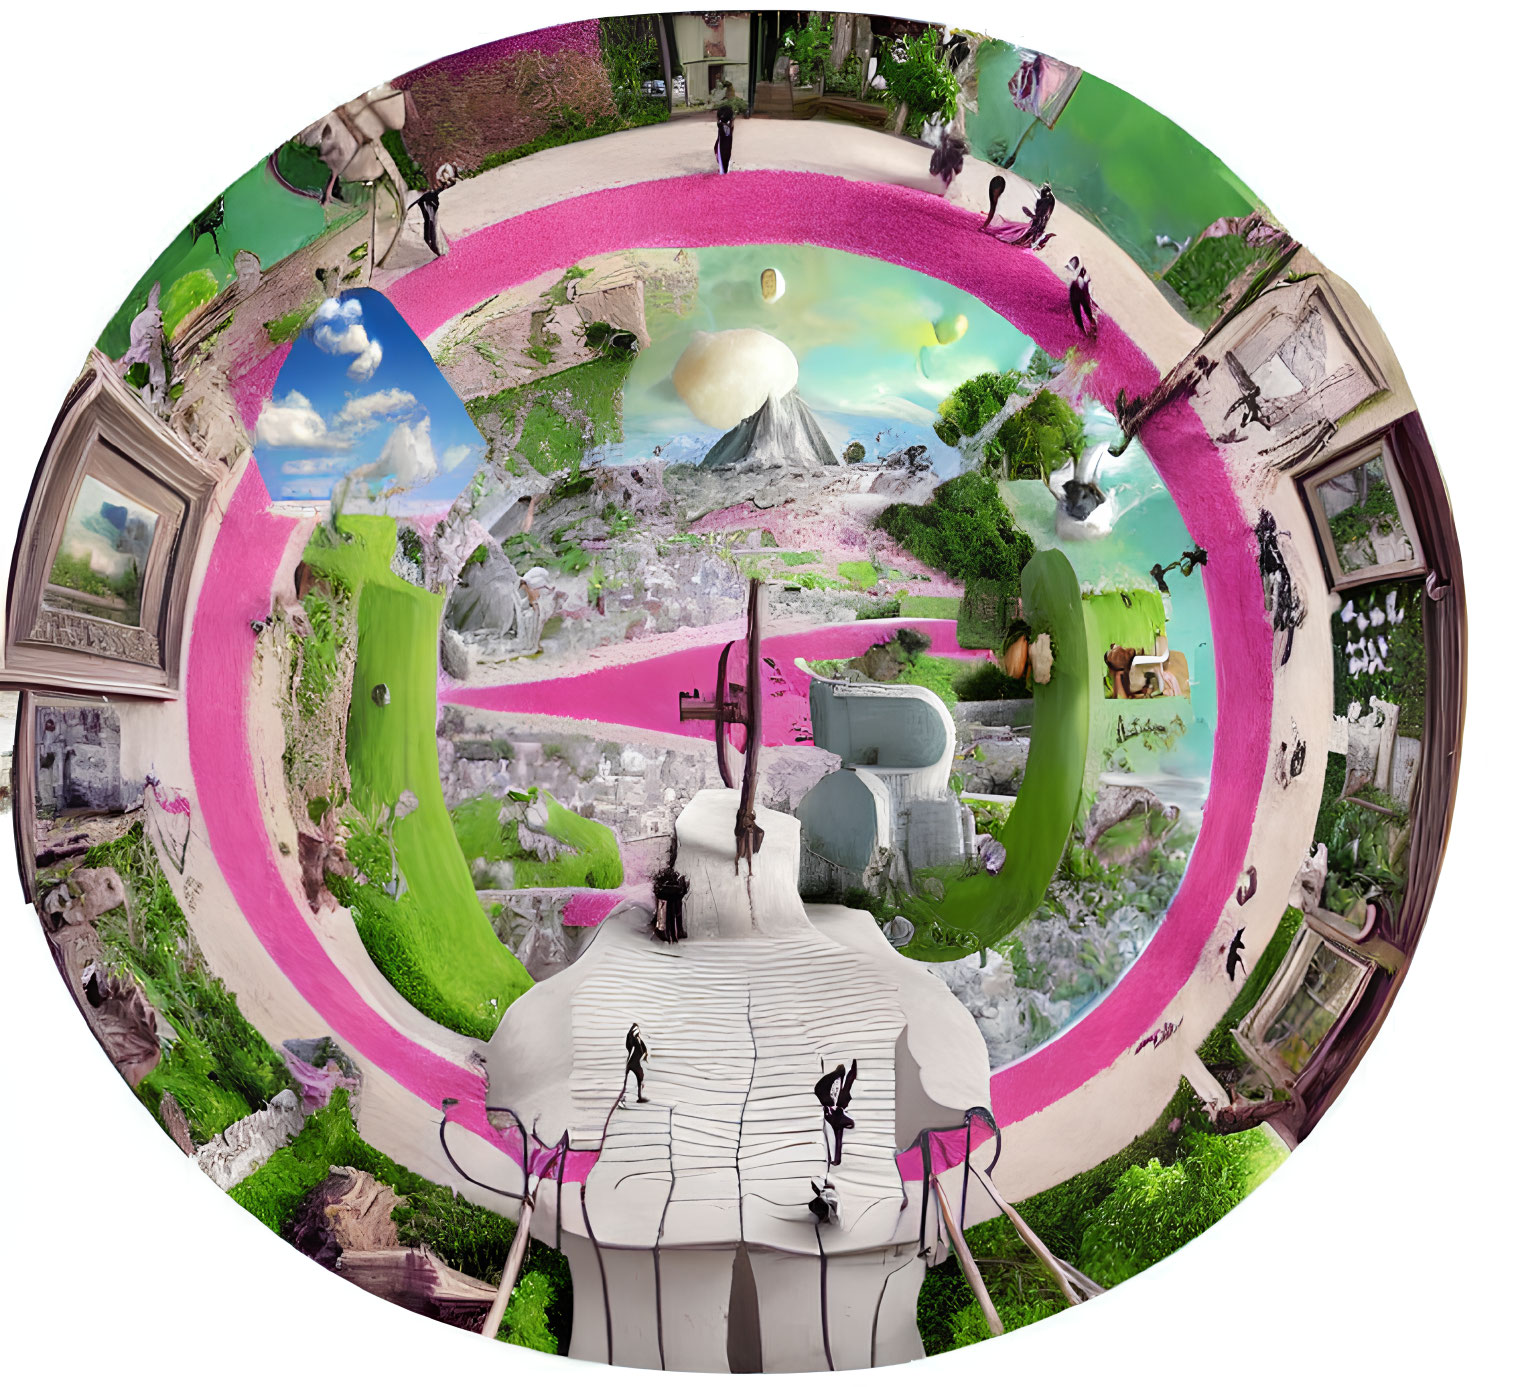 Circular Panorama Collage: People, Architecture, Nature, and Artwork in Surreal Scene